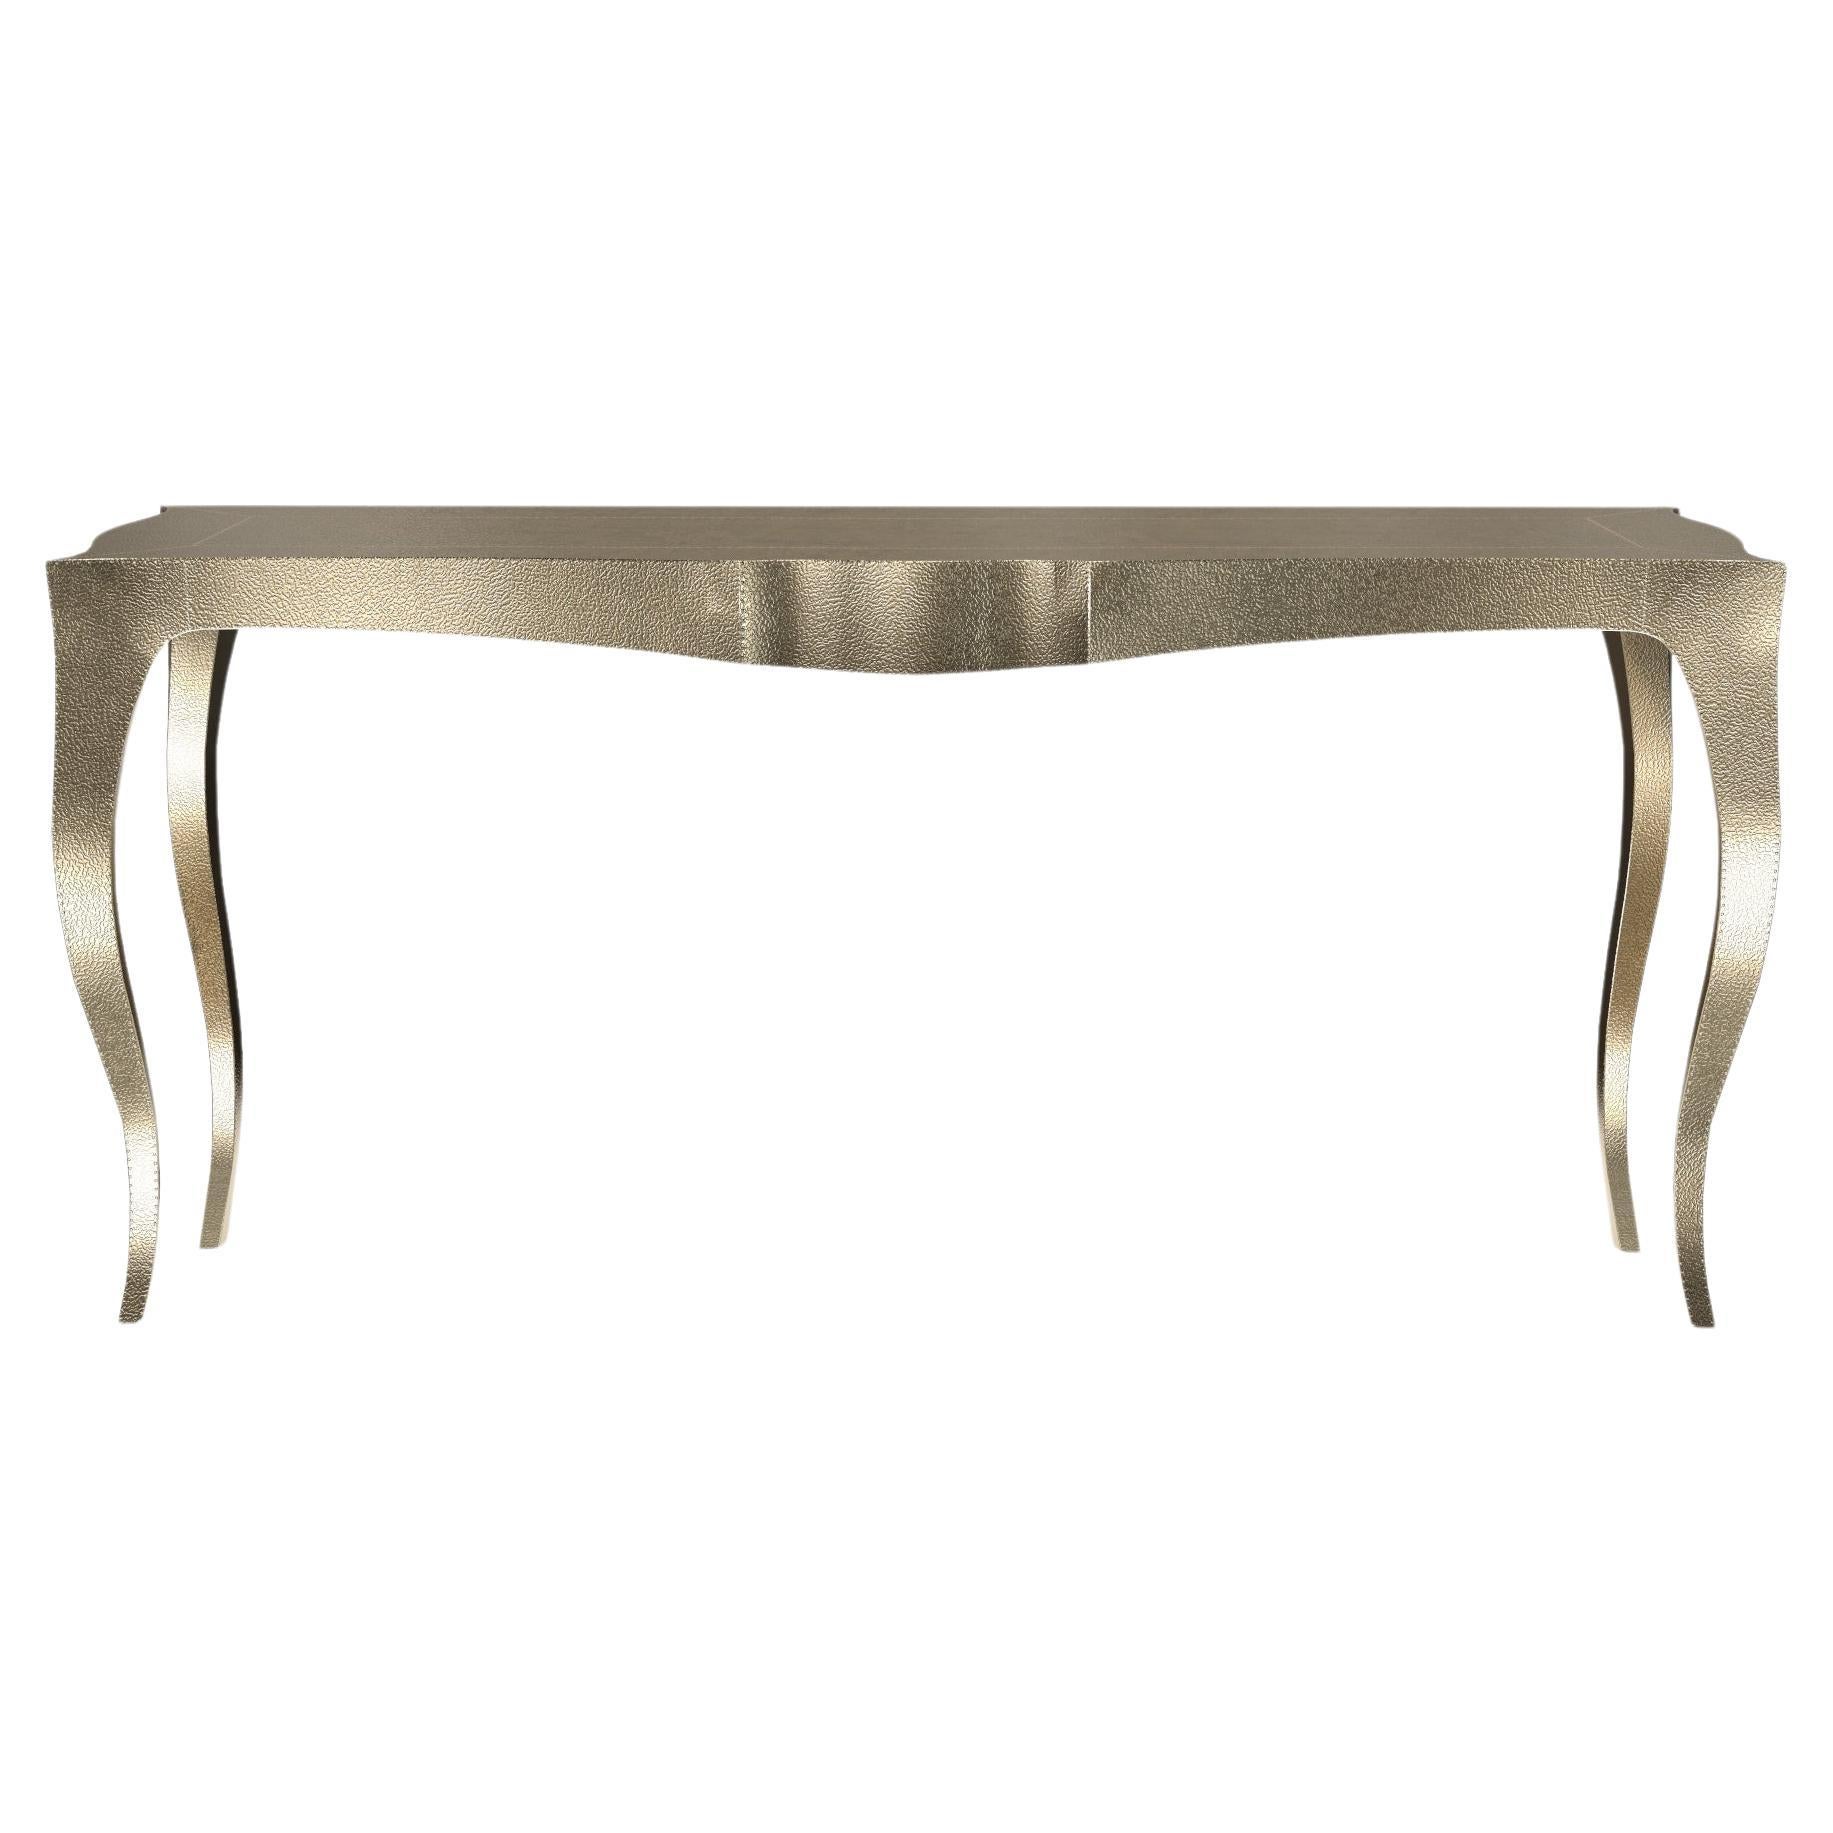 Stephanie Odegard Collection Center Tables